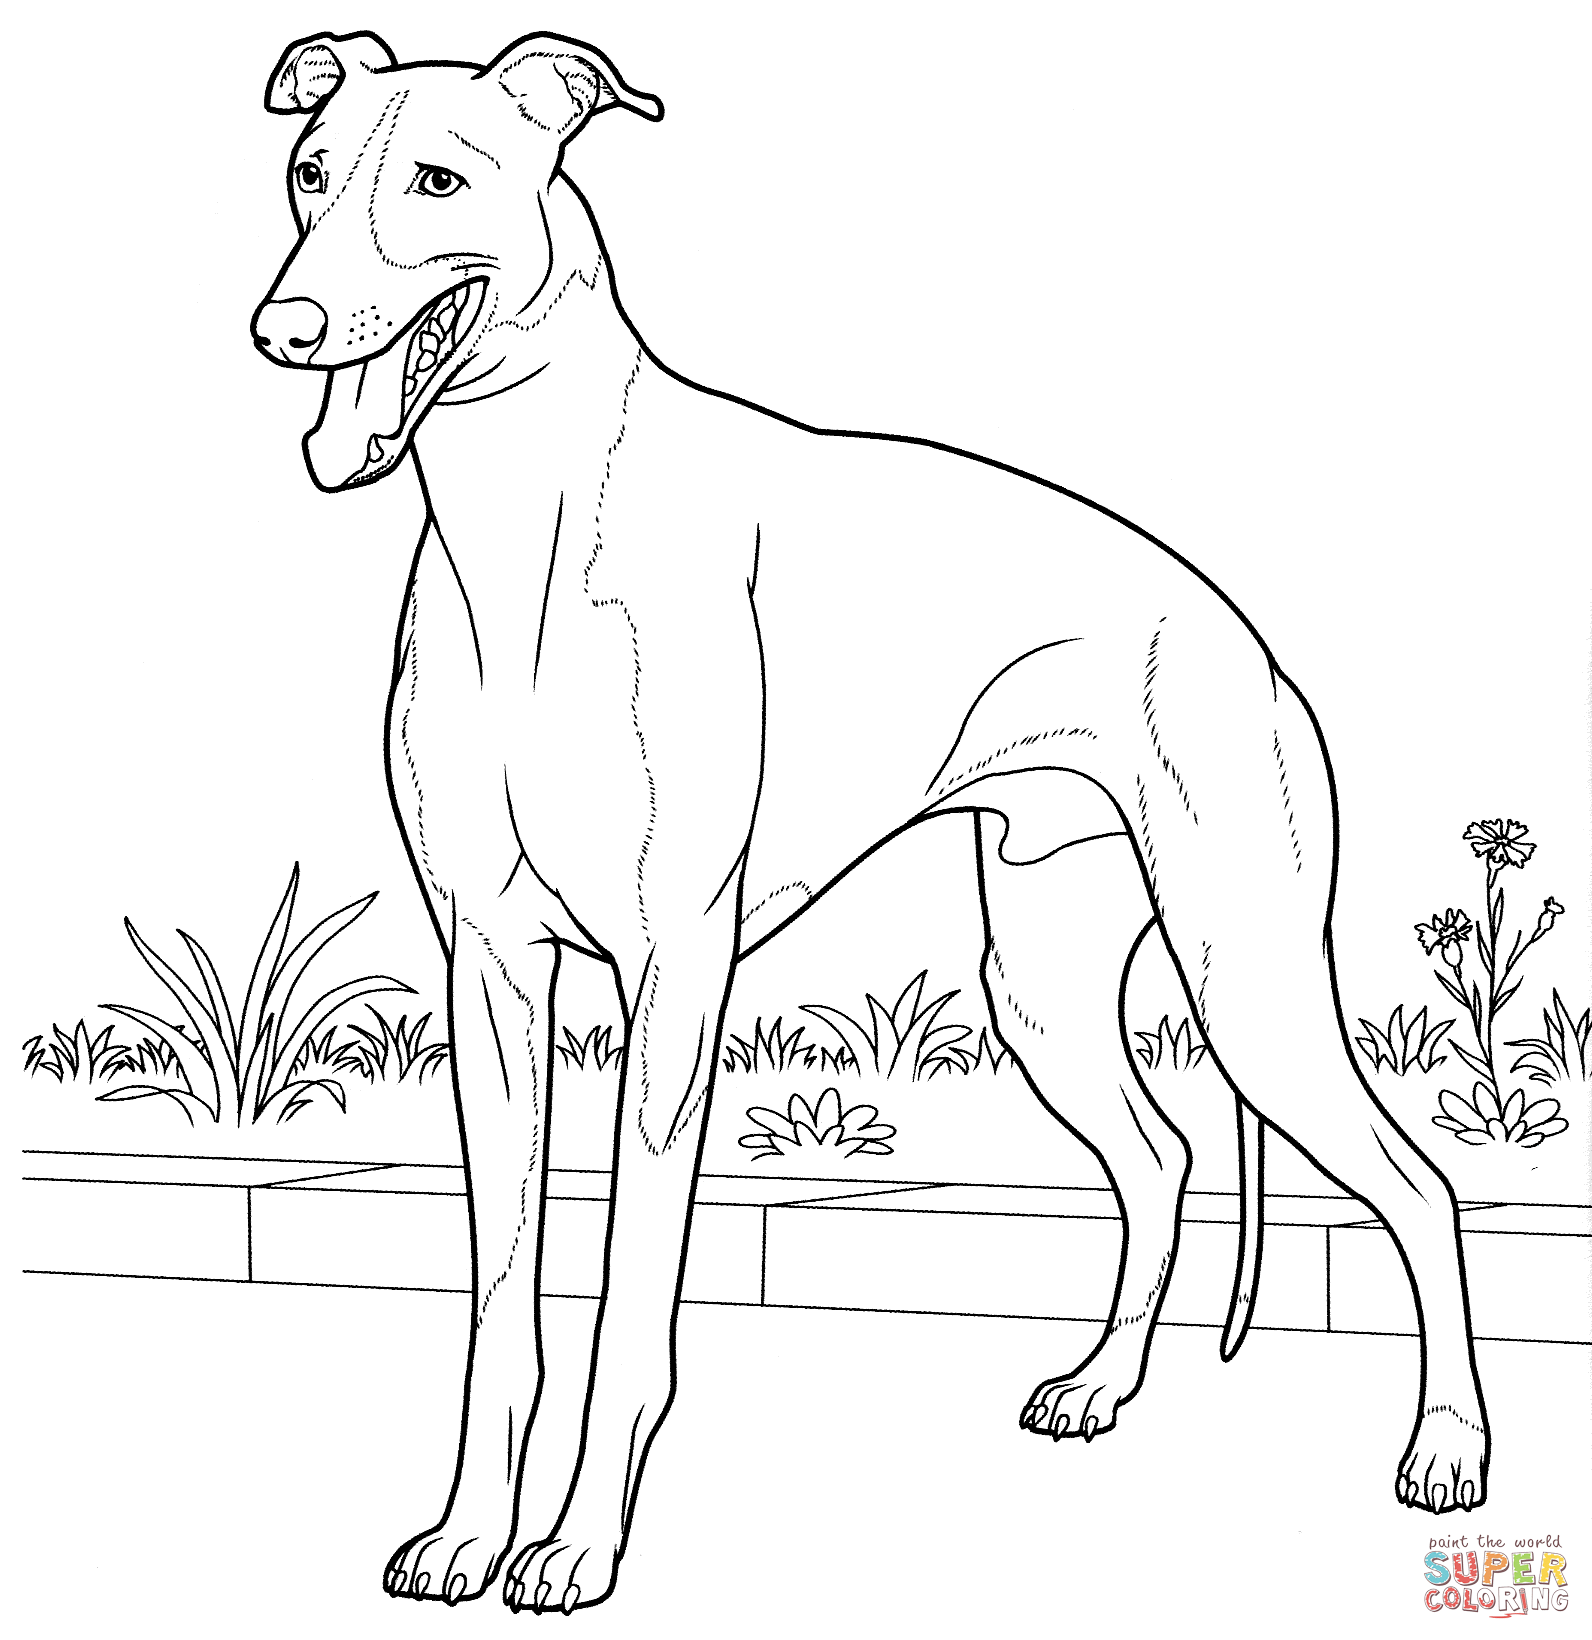 Greyhound coloring #11, Download drawings